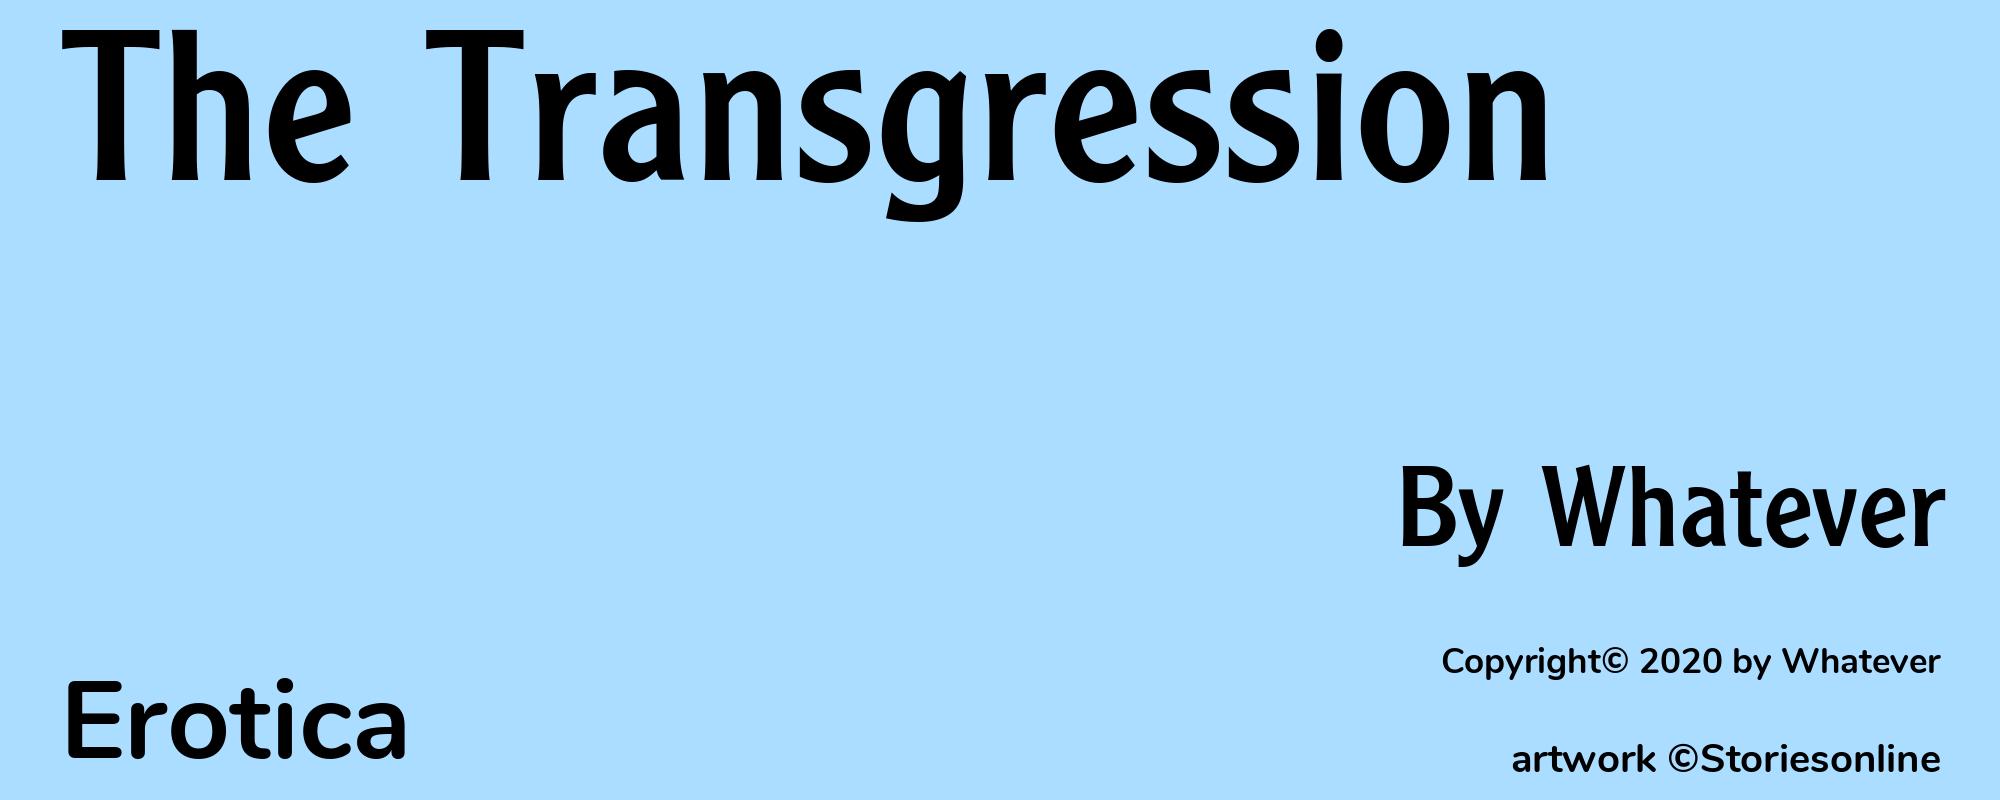 The Transgression - Cover